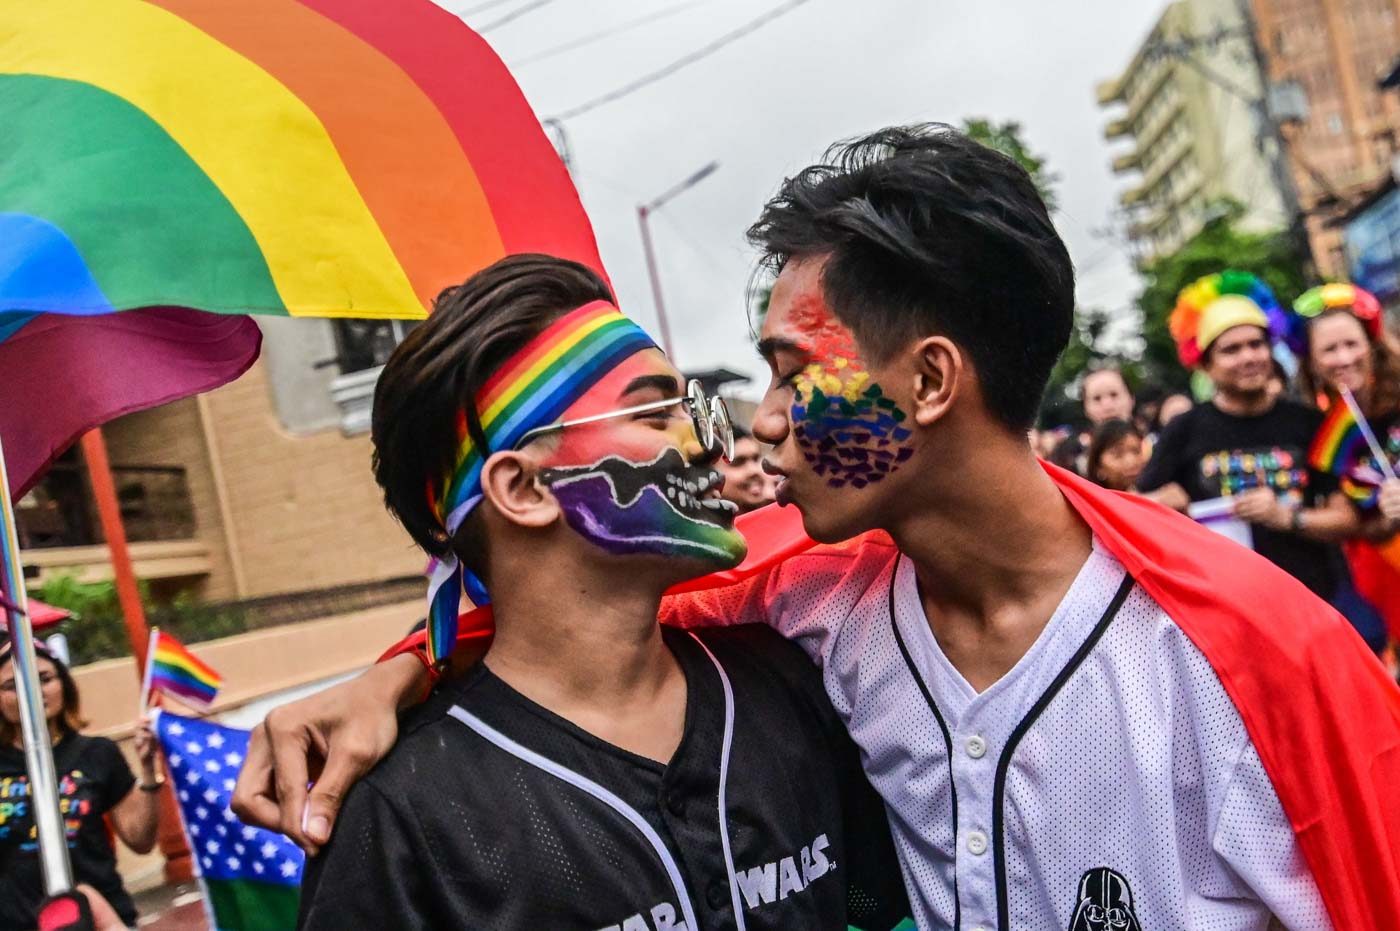 FREE TO LOVE. A couple express their love for each other during the 2019 Metro Manila Pride March at the Marikina Sports Center on Saturday, June 29. Photo by Alecs Ongcal/Rappler 